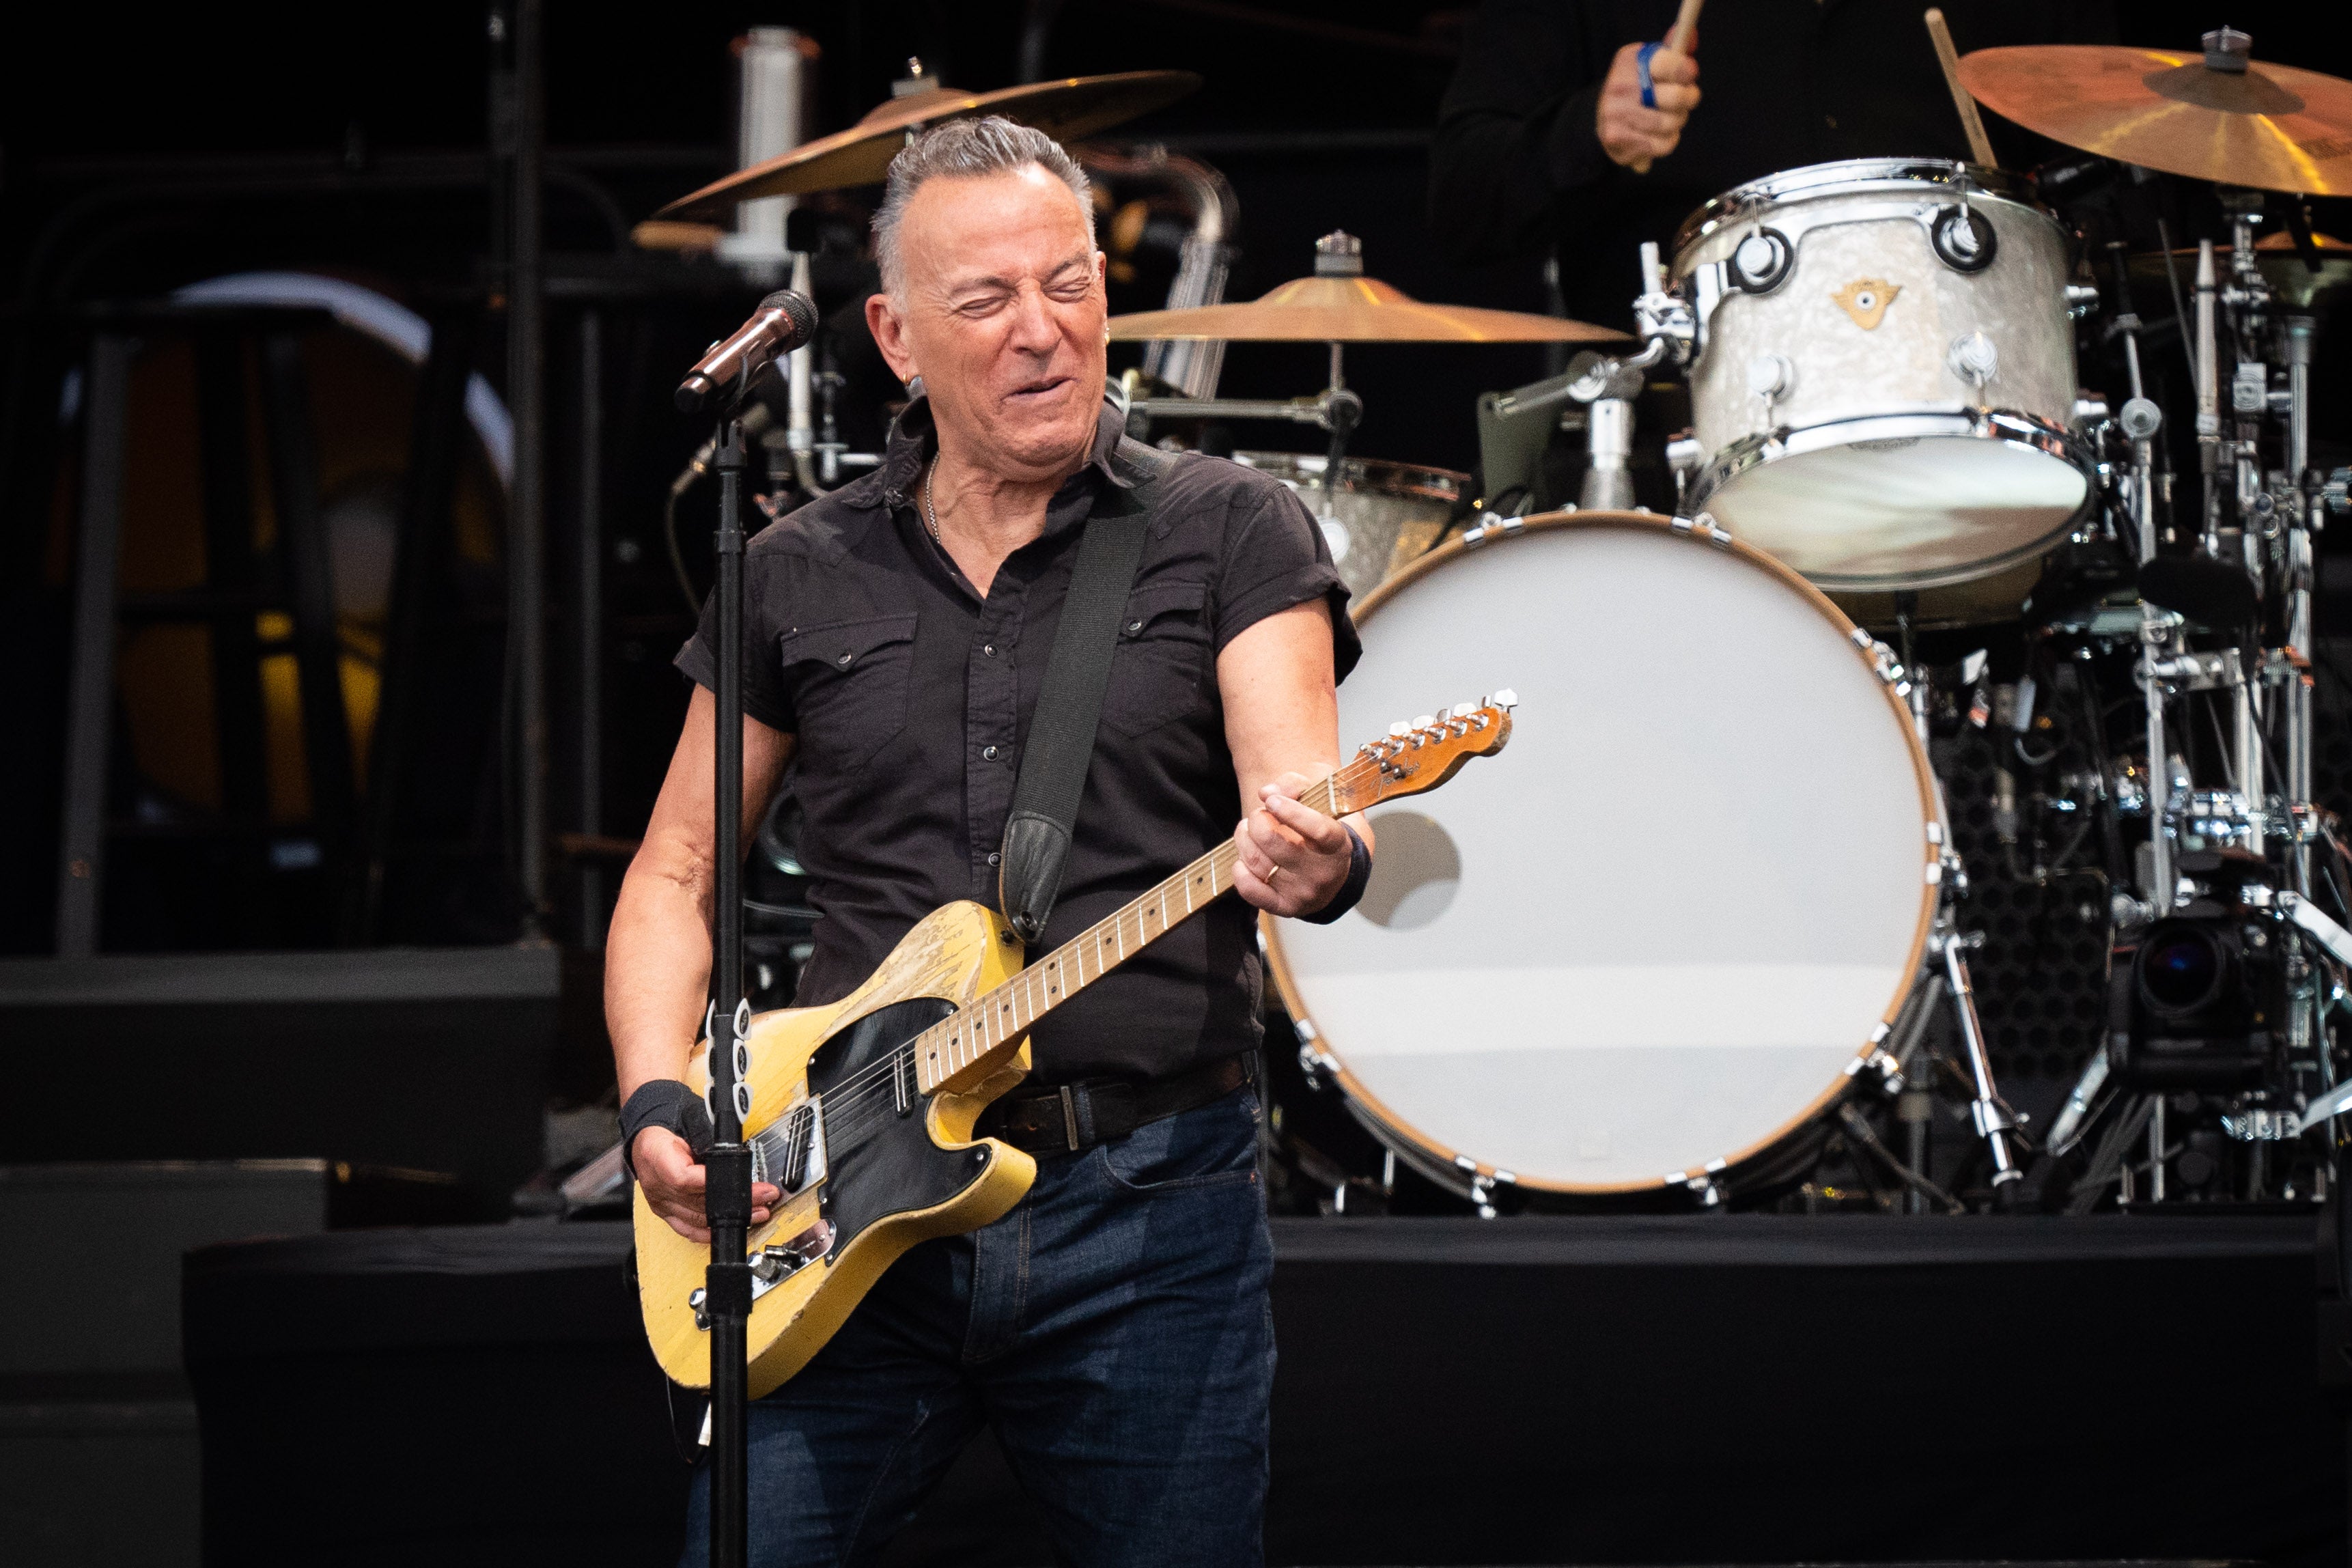 Springsteen said he was ‘proud’ to receive the award